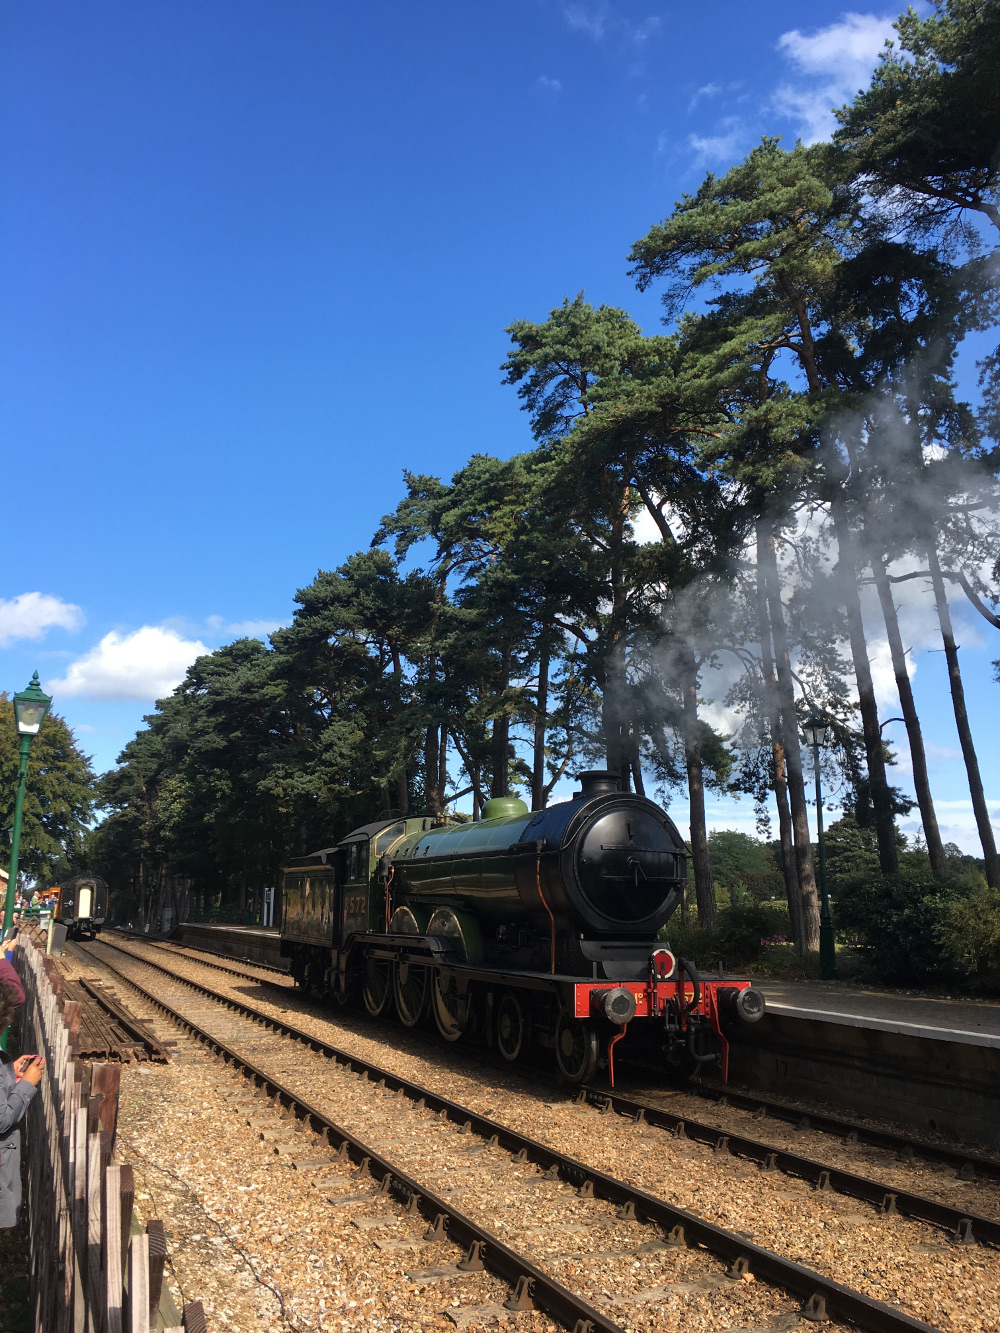 Steam train in the station at Sheringham